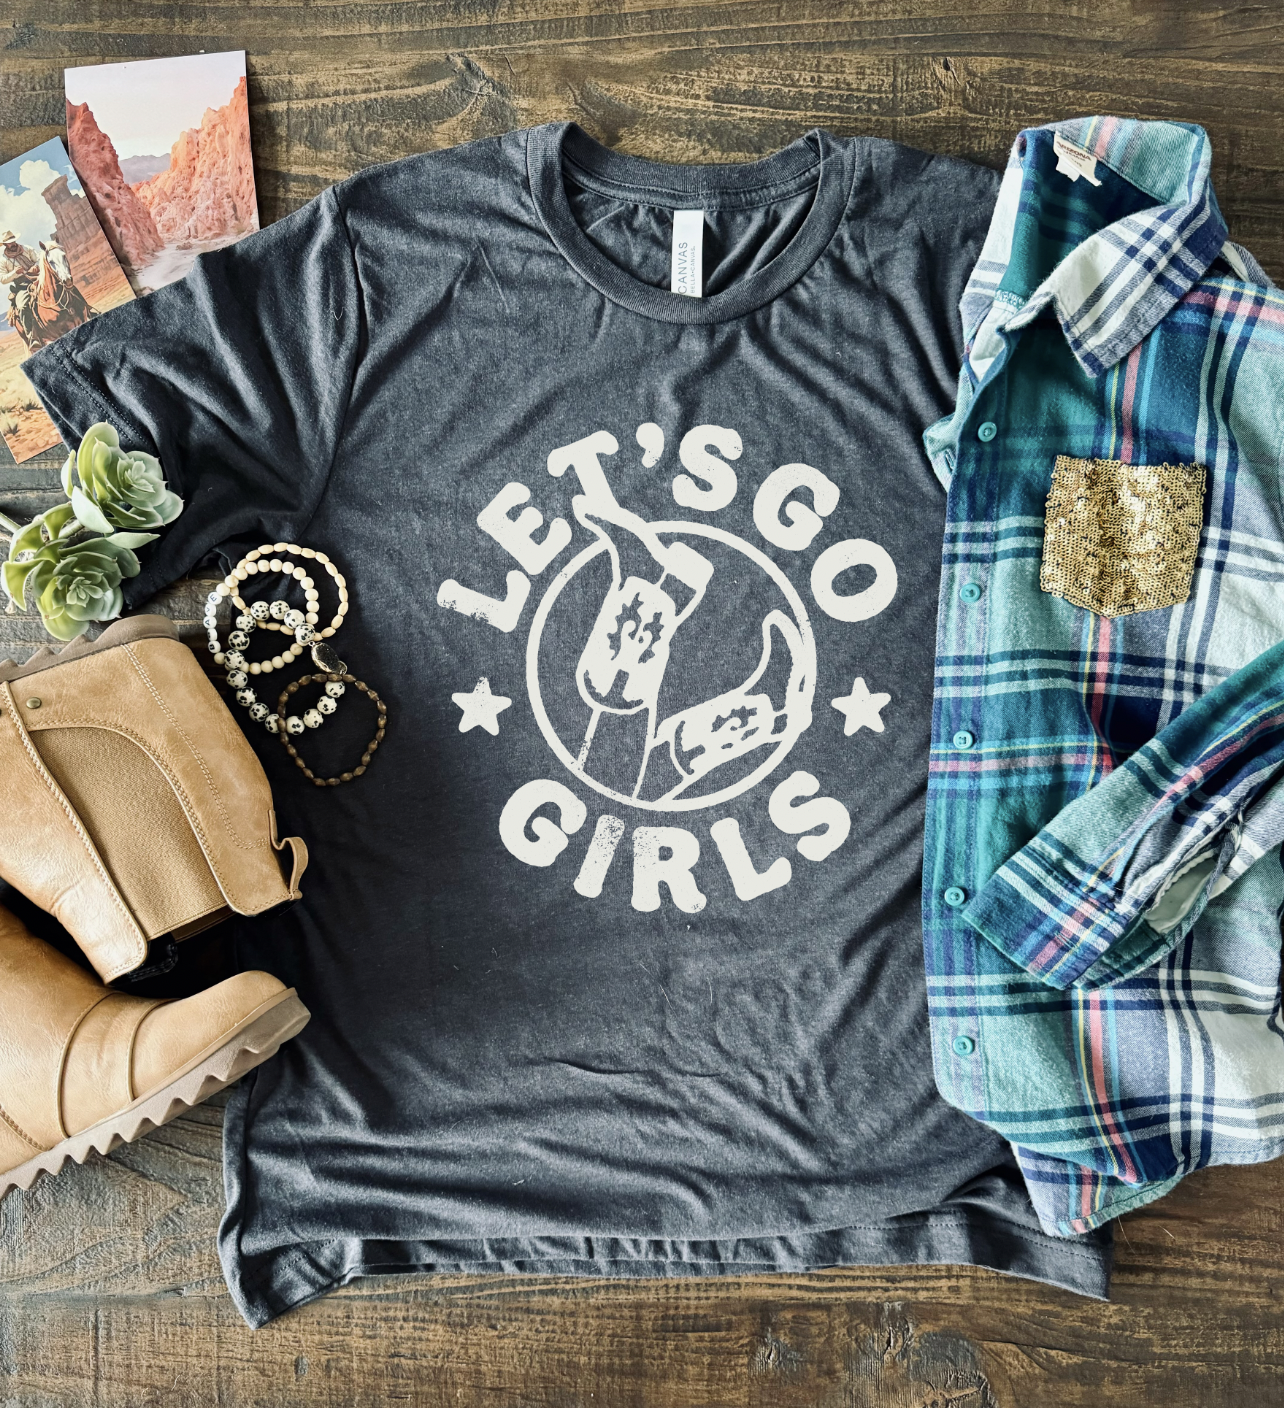 Let's Go Girls, Vintage, Country, Western, Distressed, Bella and Canvas, Hand-made apparel, Shipped from Texas, Charcoal Unisex Shirt.